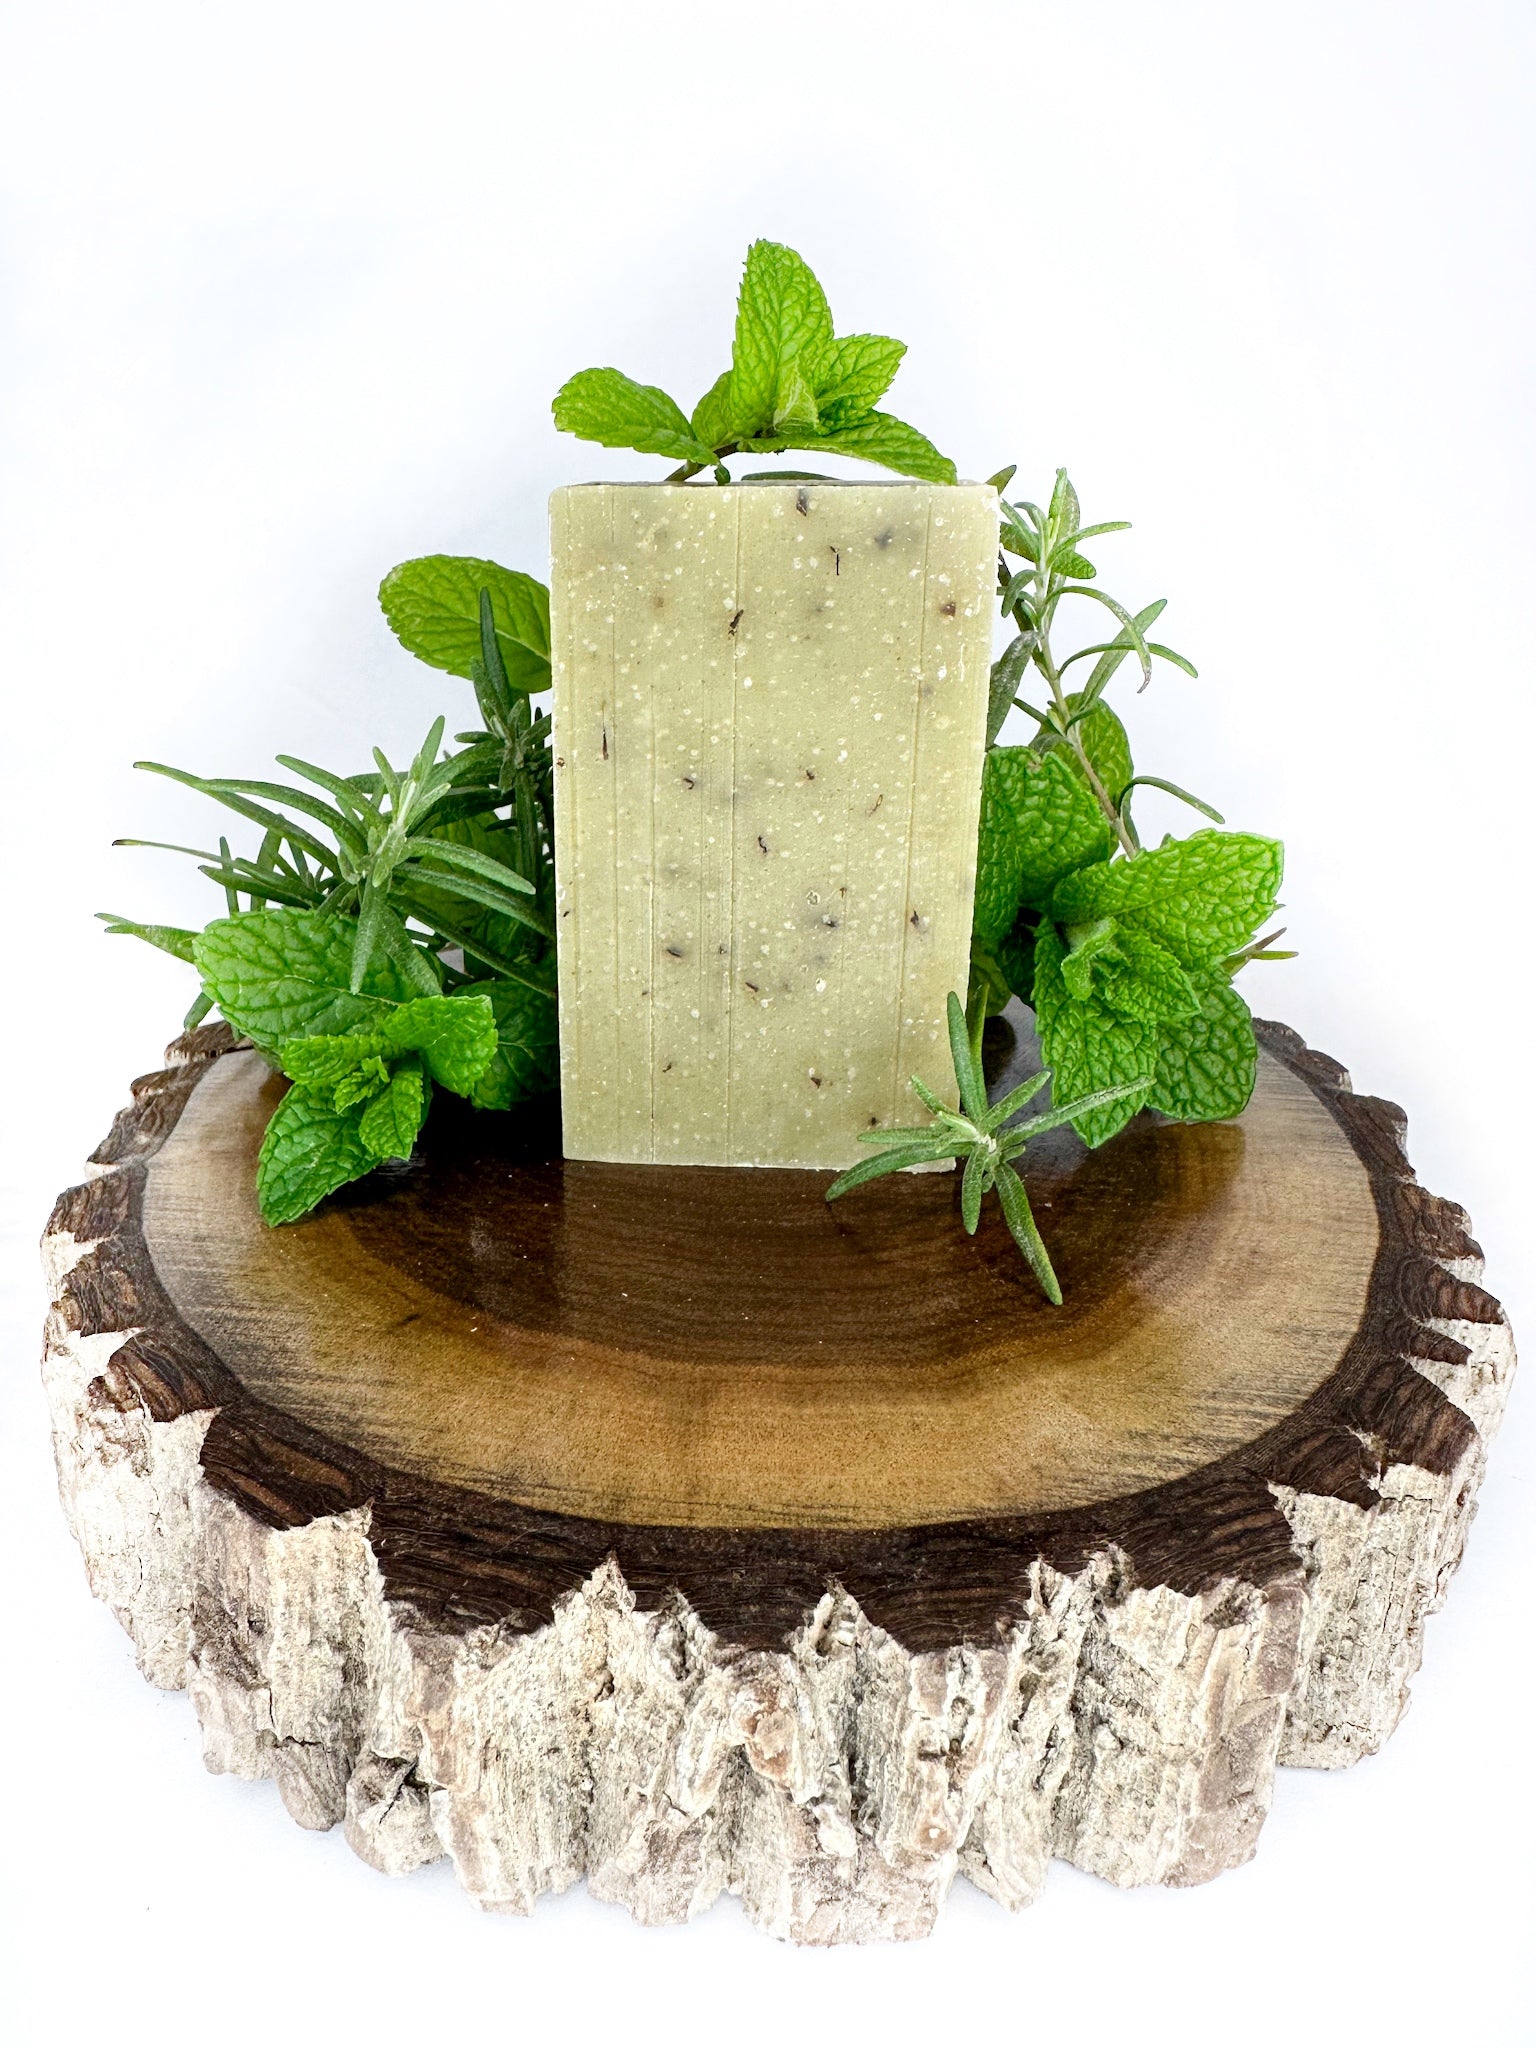 Peppermint Rosemary Soap